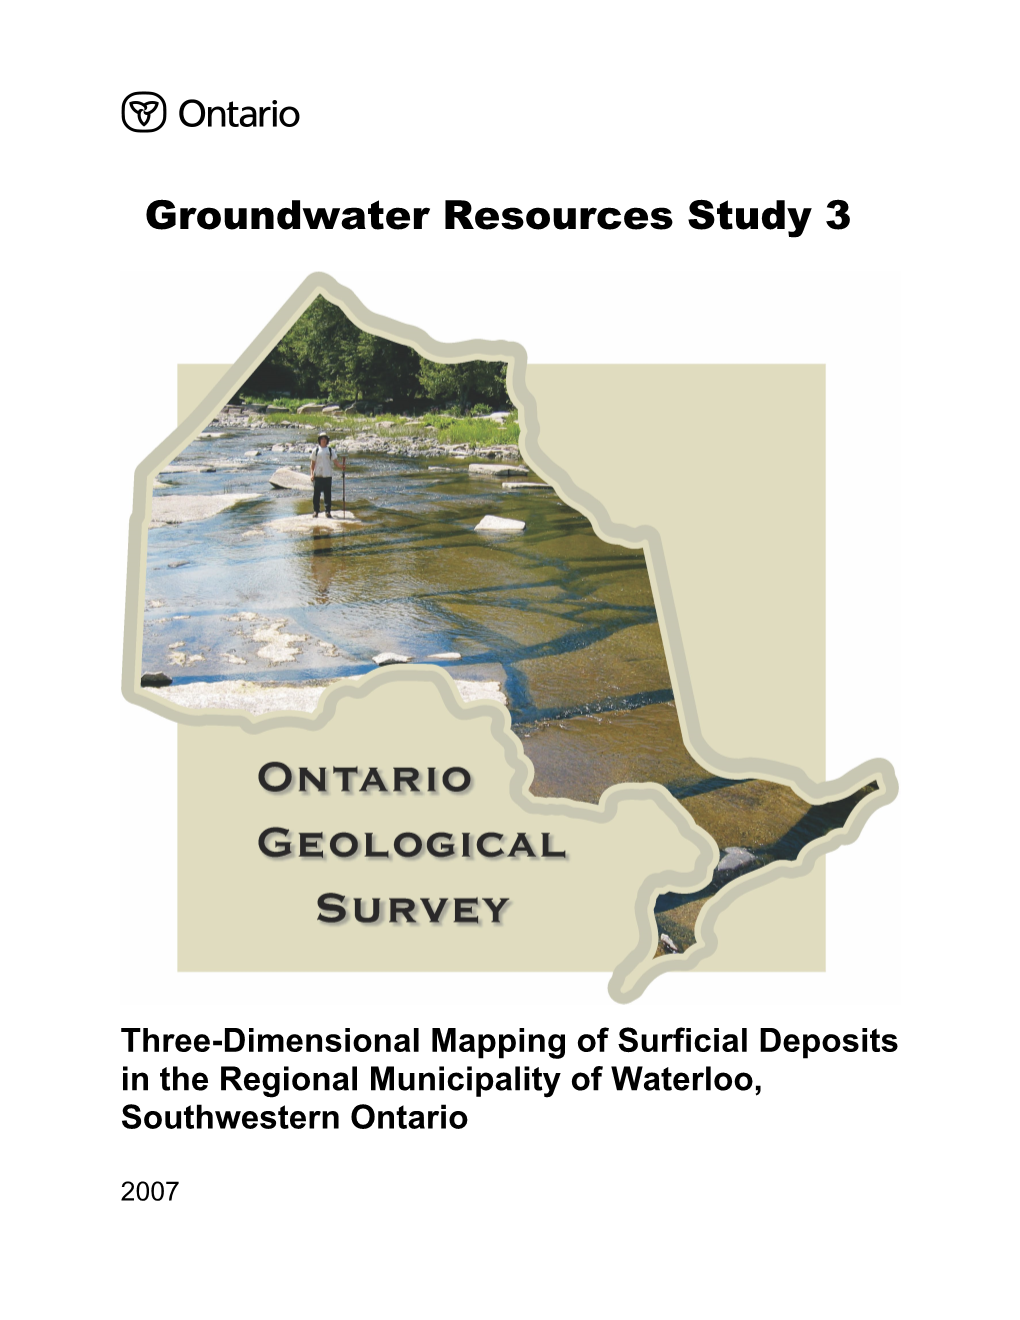 Groundwater Resources Studies (GRS) 3